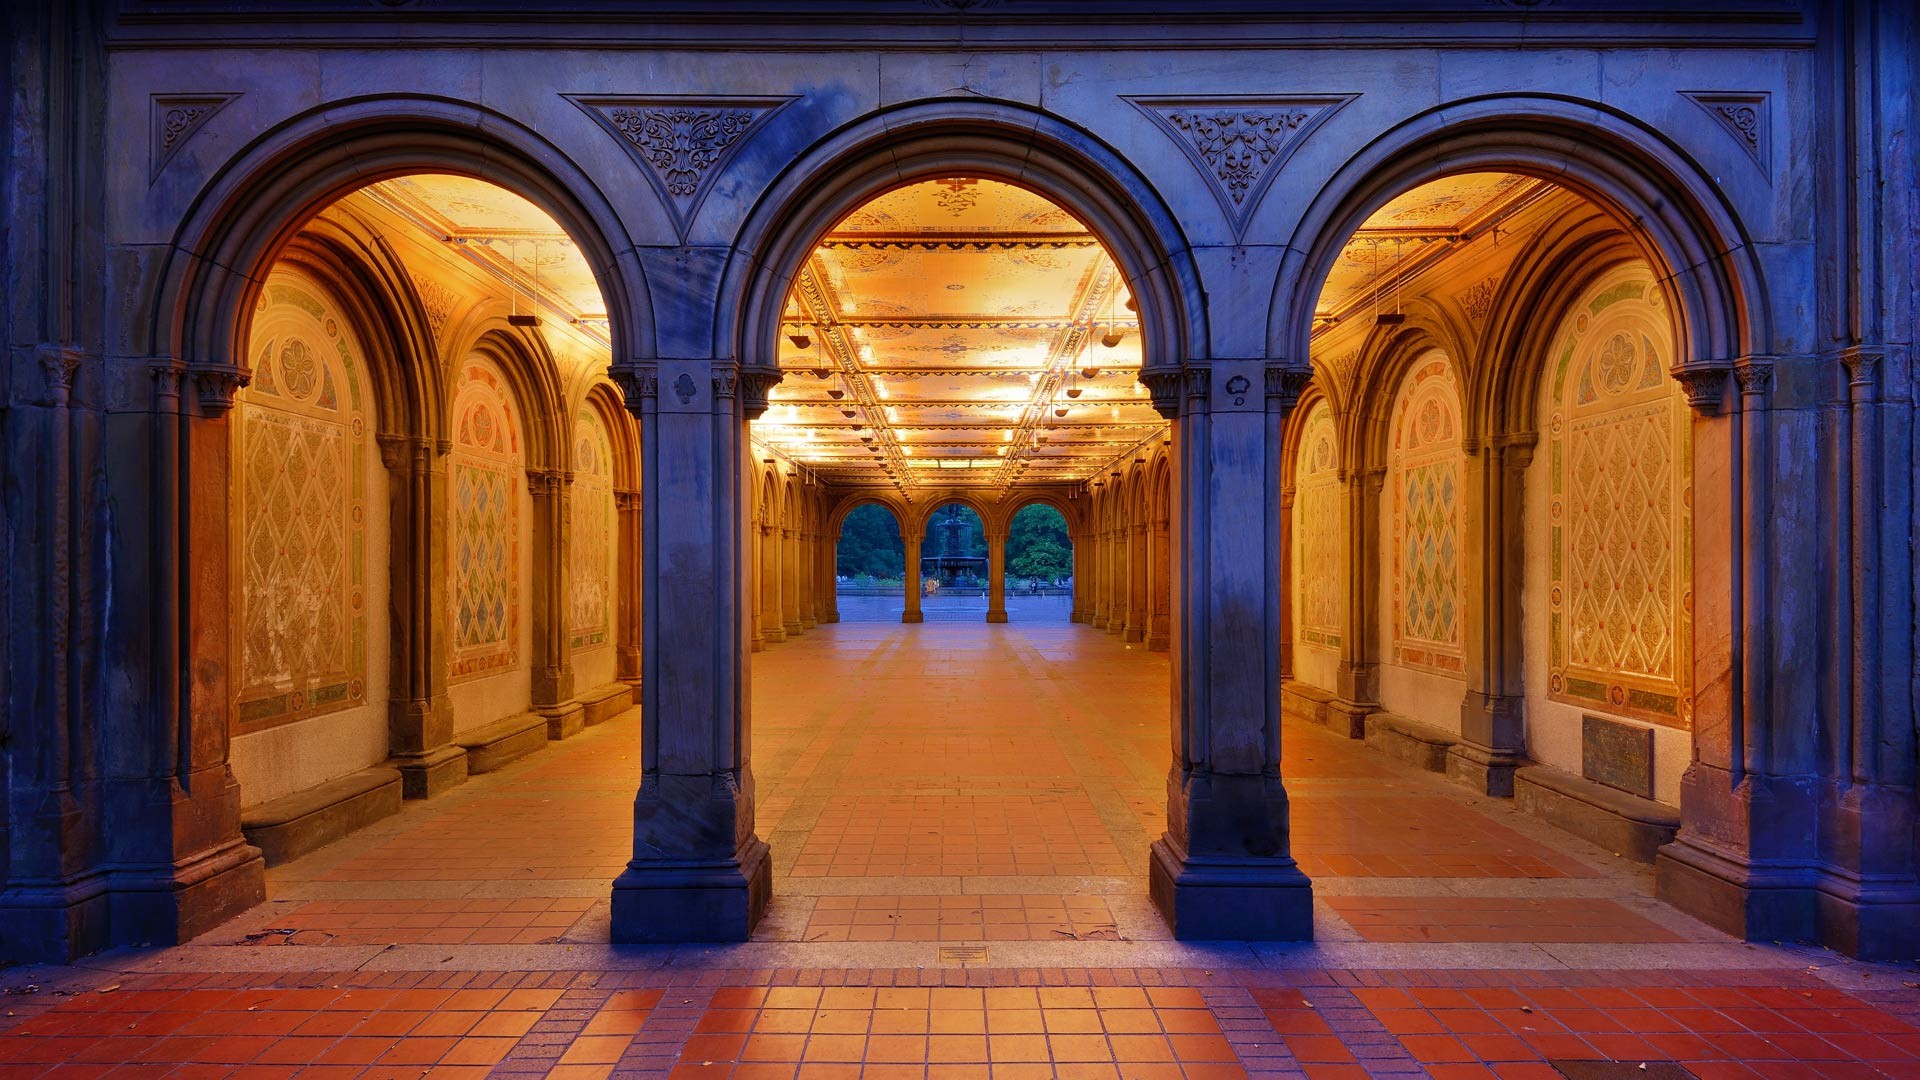 Architecture Symmetry Lights Tiles Arch Passage Trees New York City Central Park USA Fountain Water  1920x1080